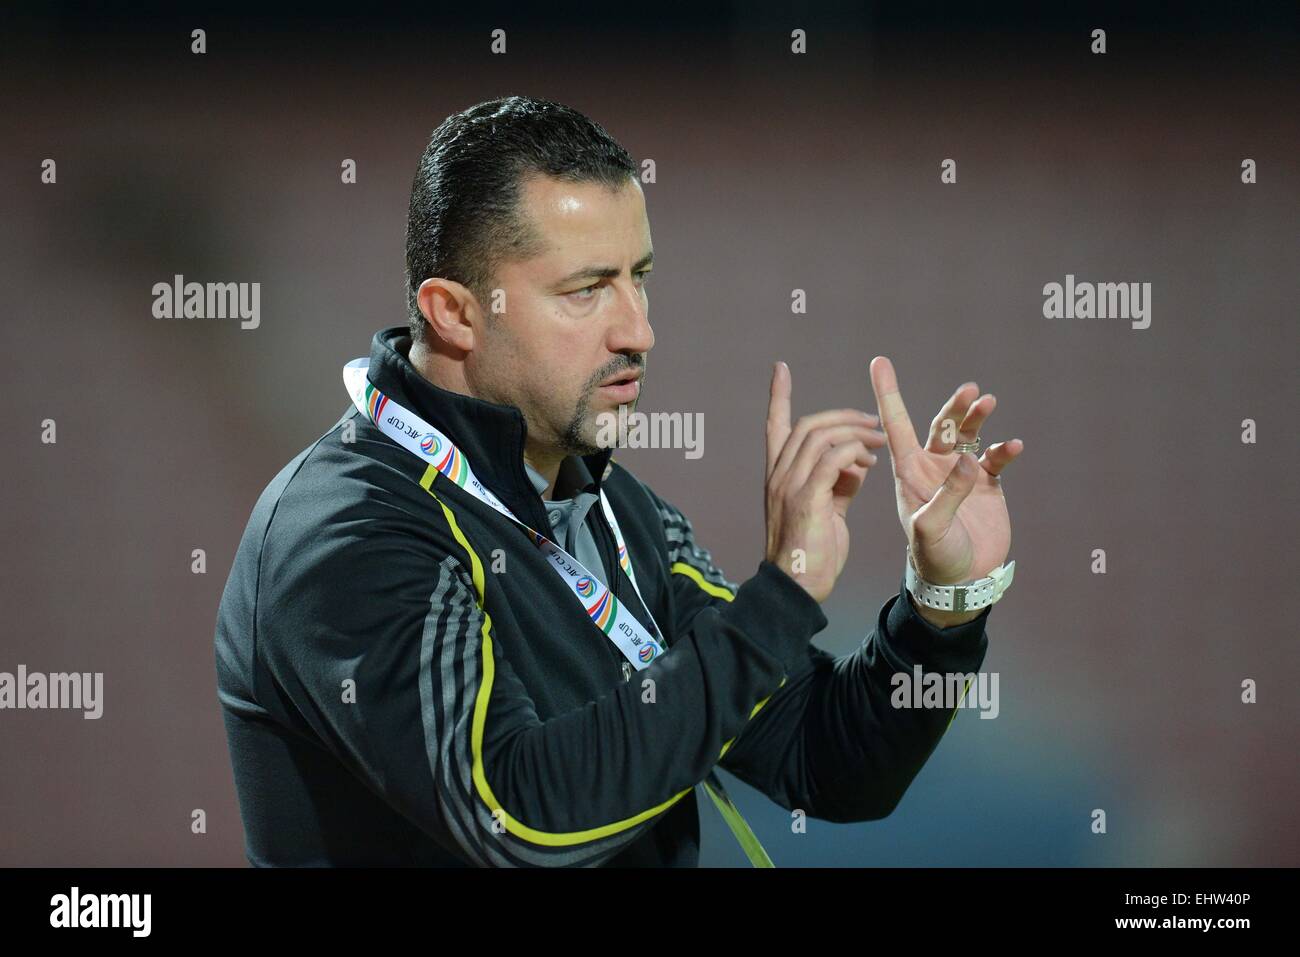 150318) -- KUWAIT CITY, Mar. 18, 2015(Xinhua) -- Anas Makhlouf, head coach  of Syria's Al Jaish, gestures during the Group D match of AFC CUP 2015  against Kuwait's Al Kuwait SC in